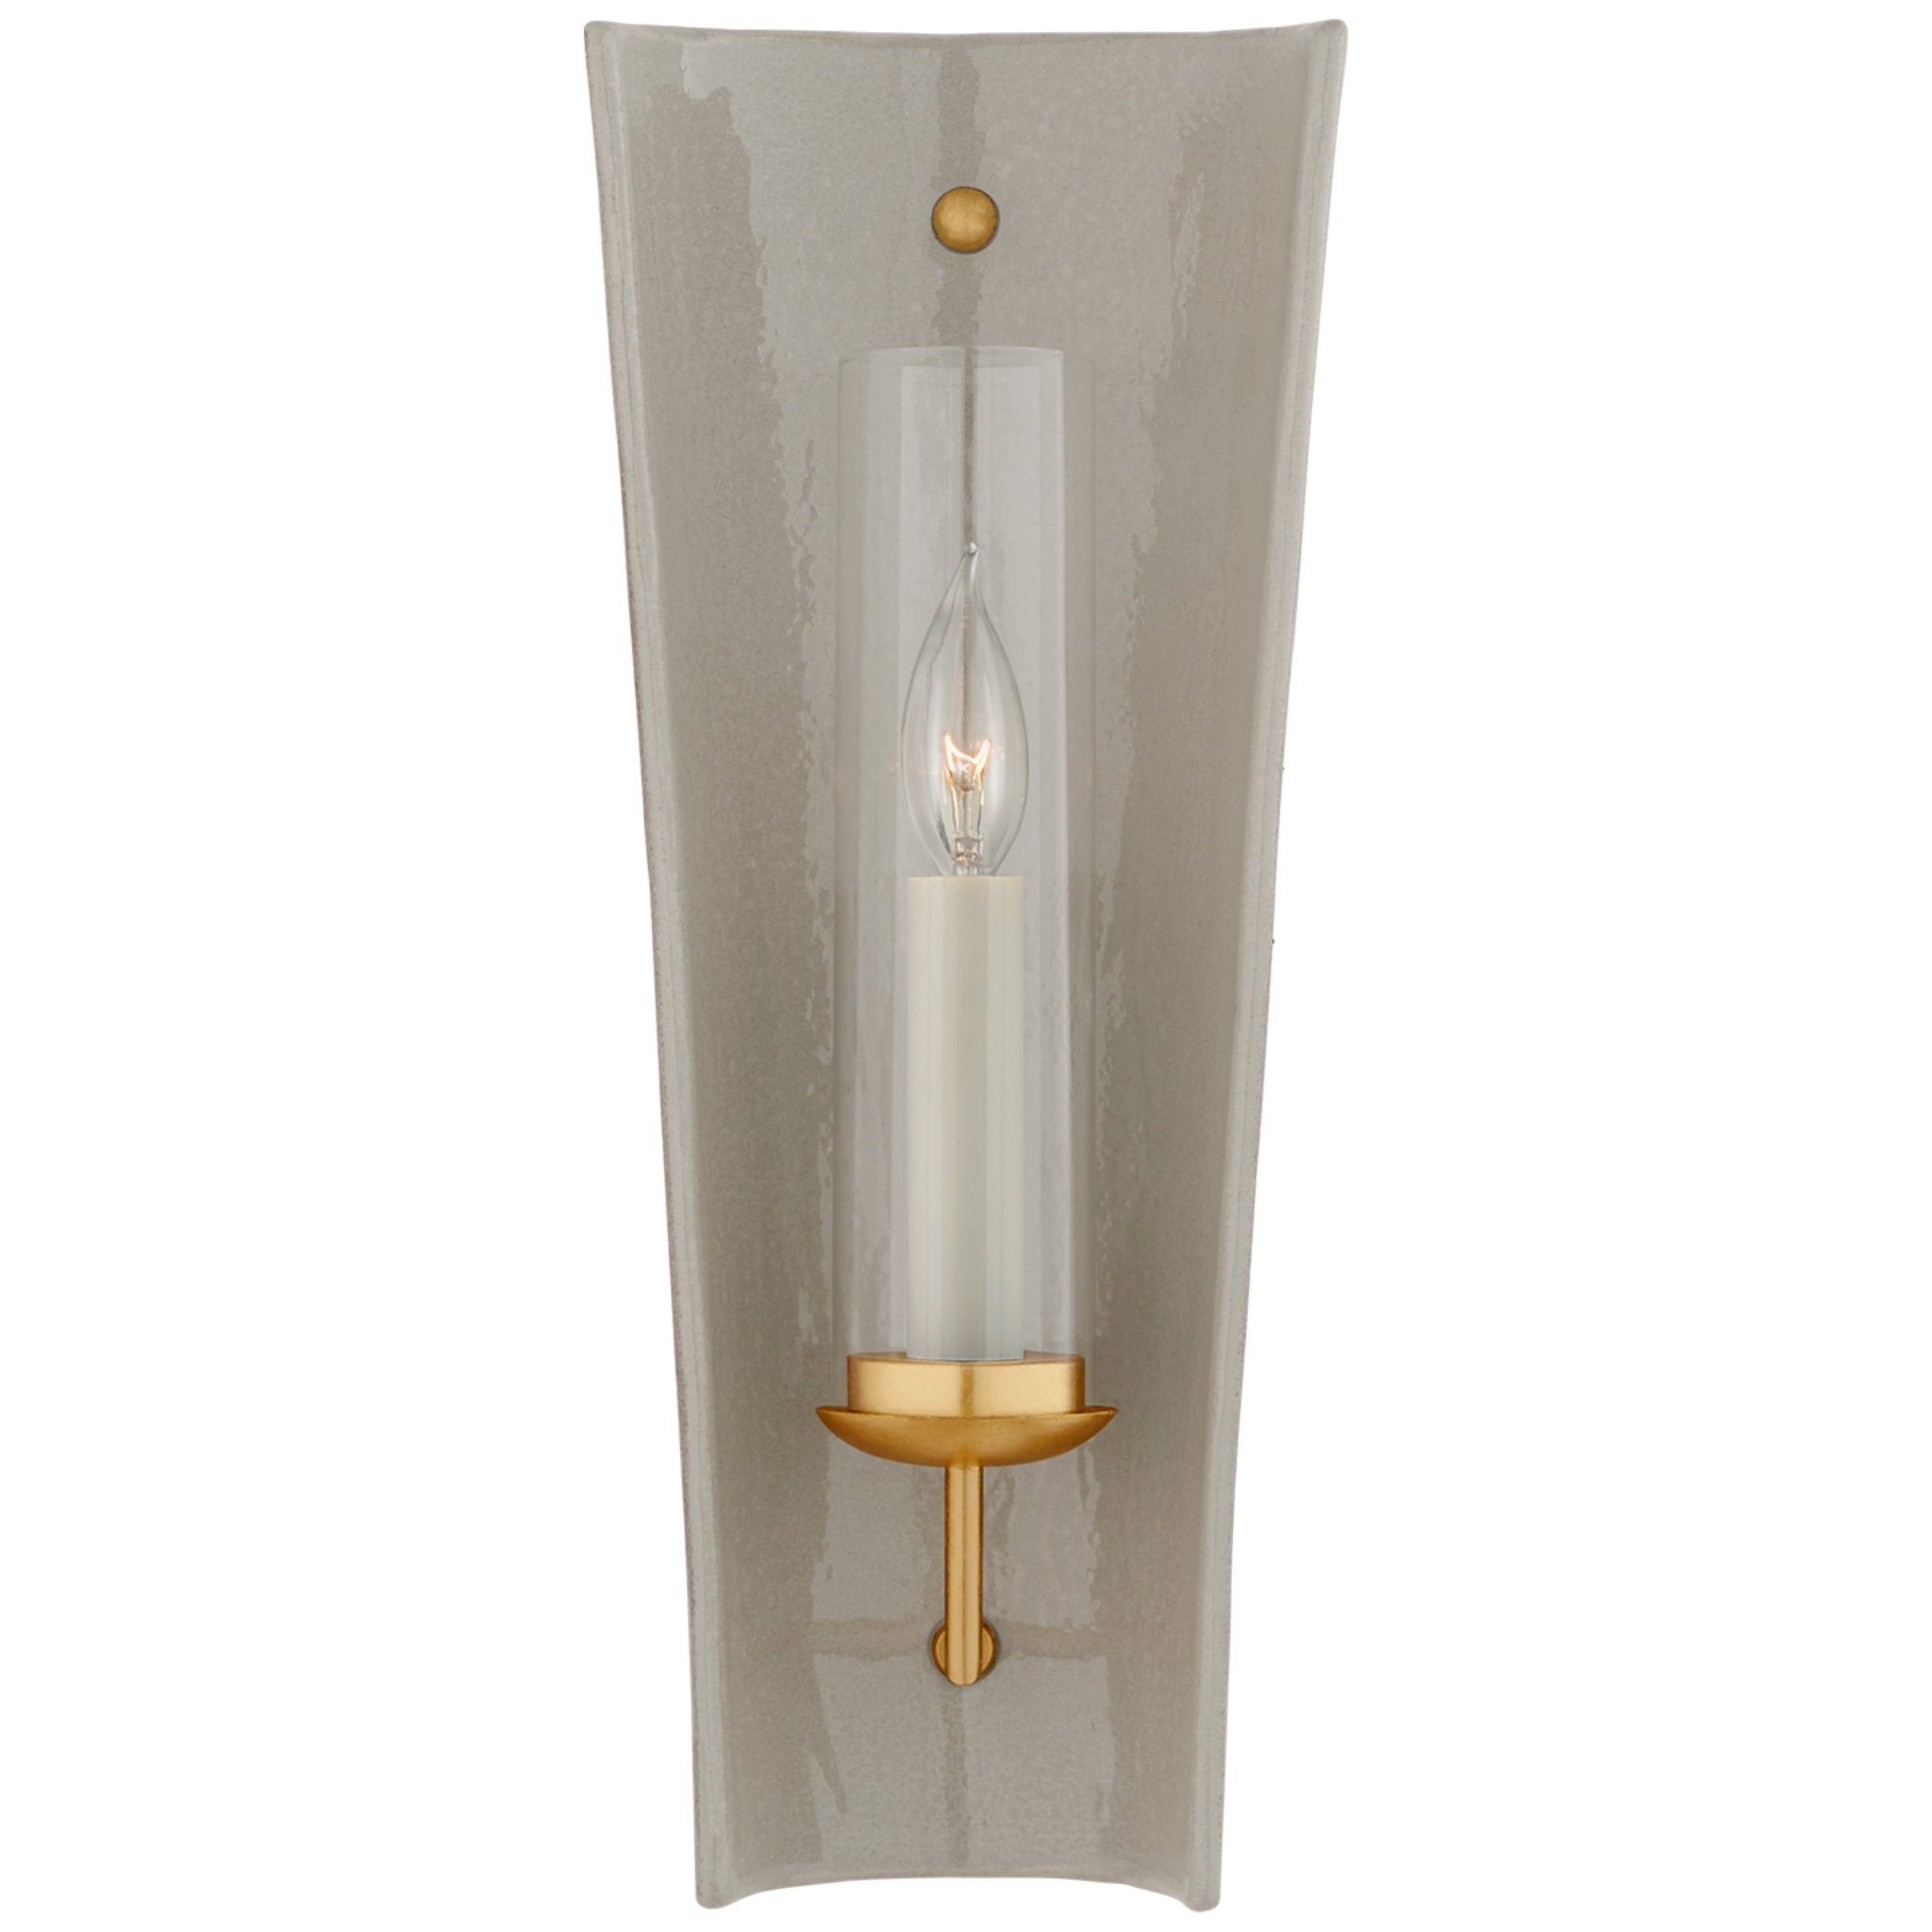 Chapman & Myers Downey Medium Reflector Sconce in Shellish Gray and Gild with Clear Glass